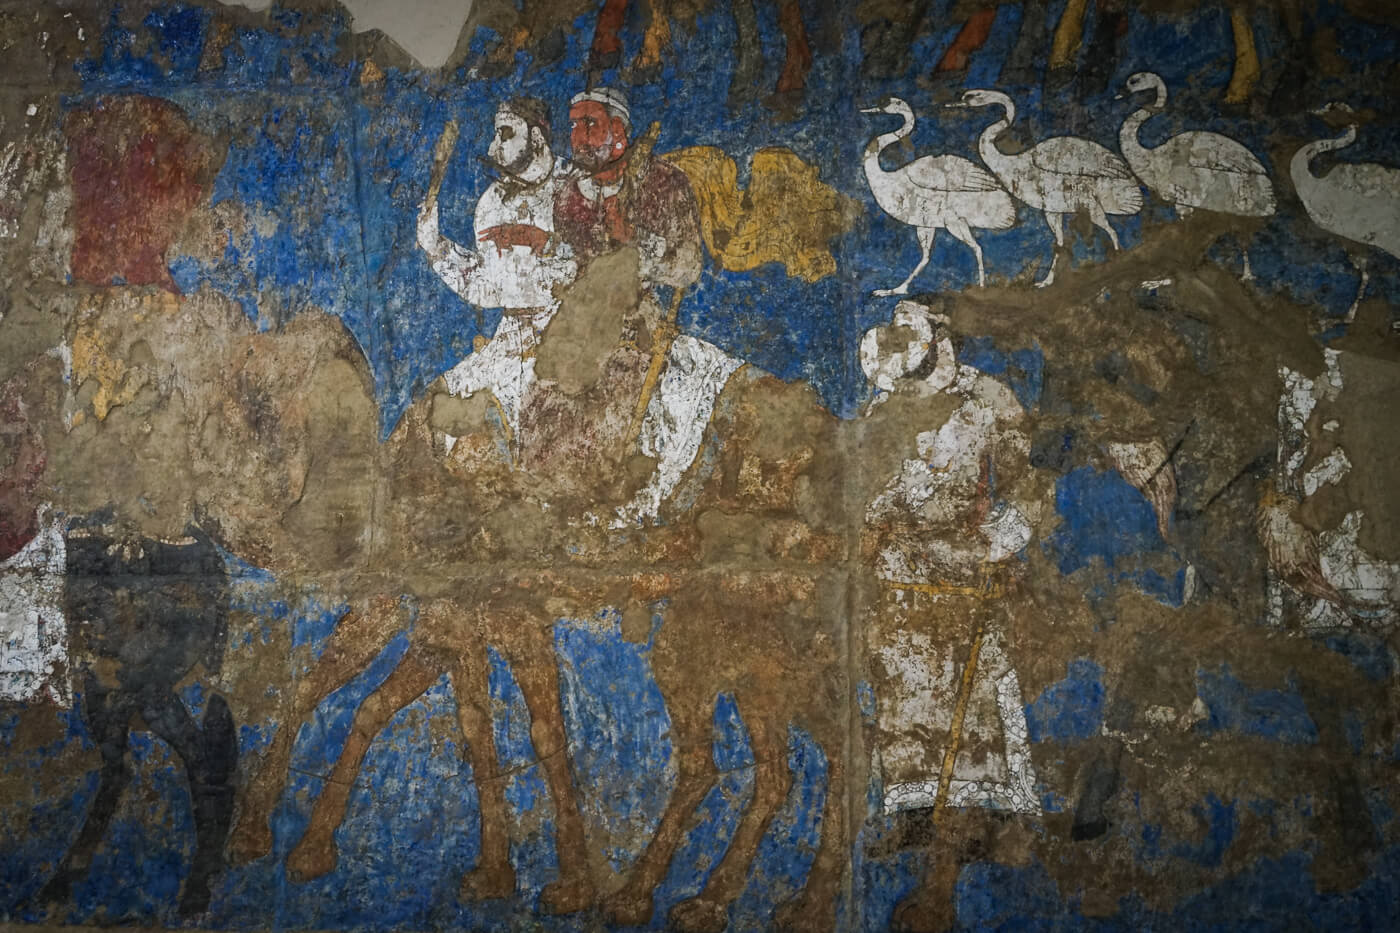 Sogdians of Central Asia, the ancient silk road traders mural from Samarkand, Afrosiab